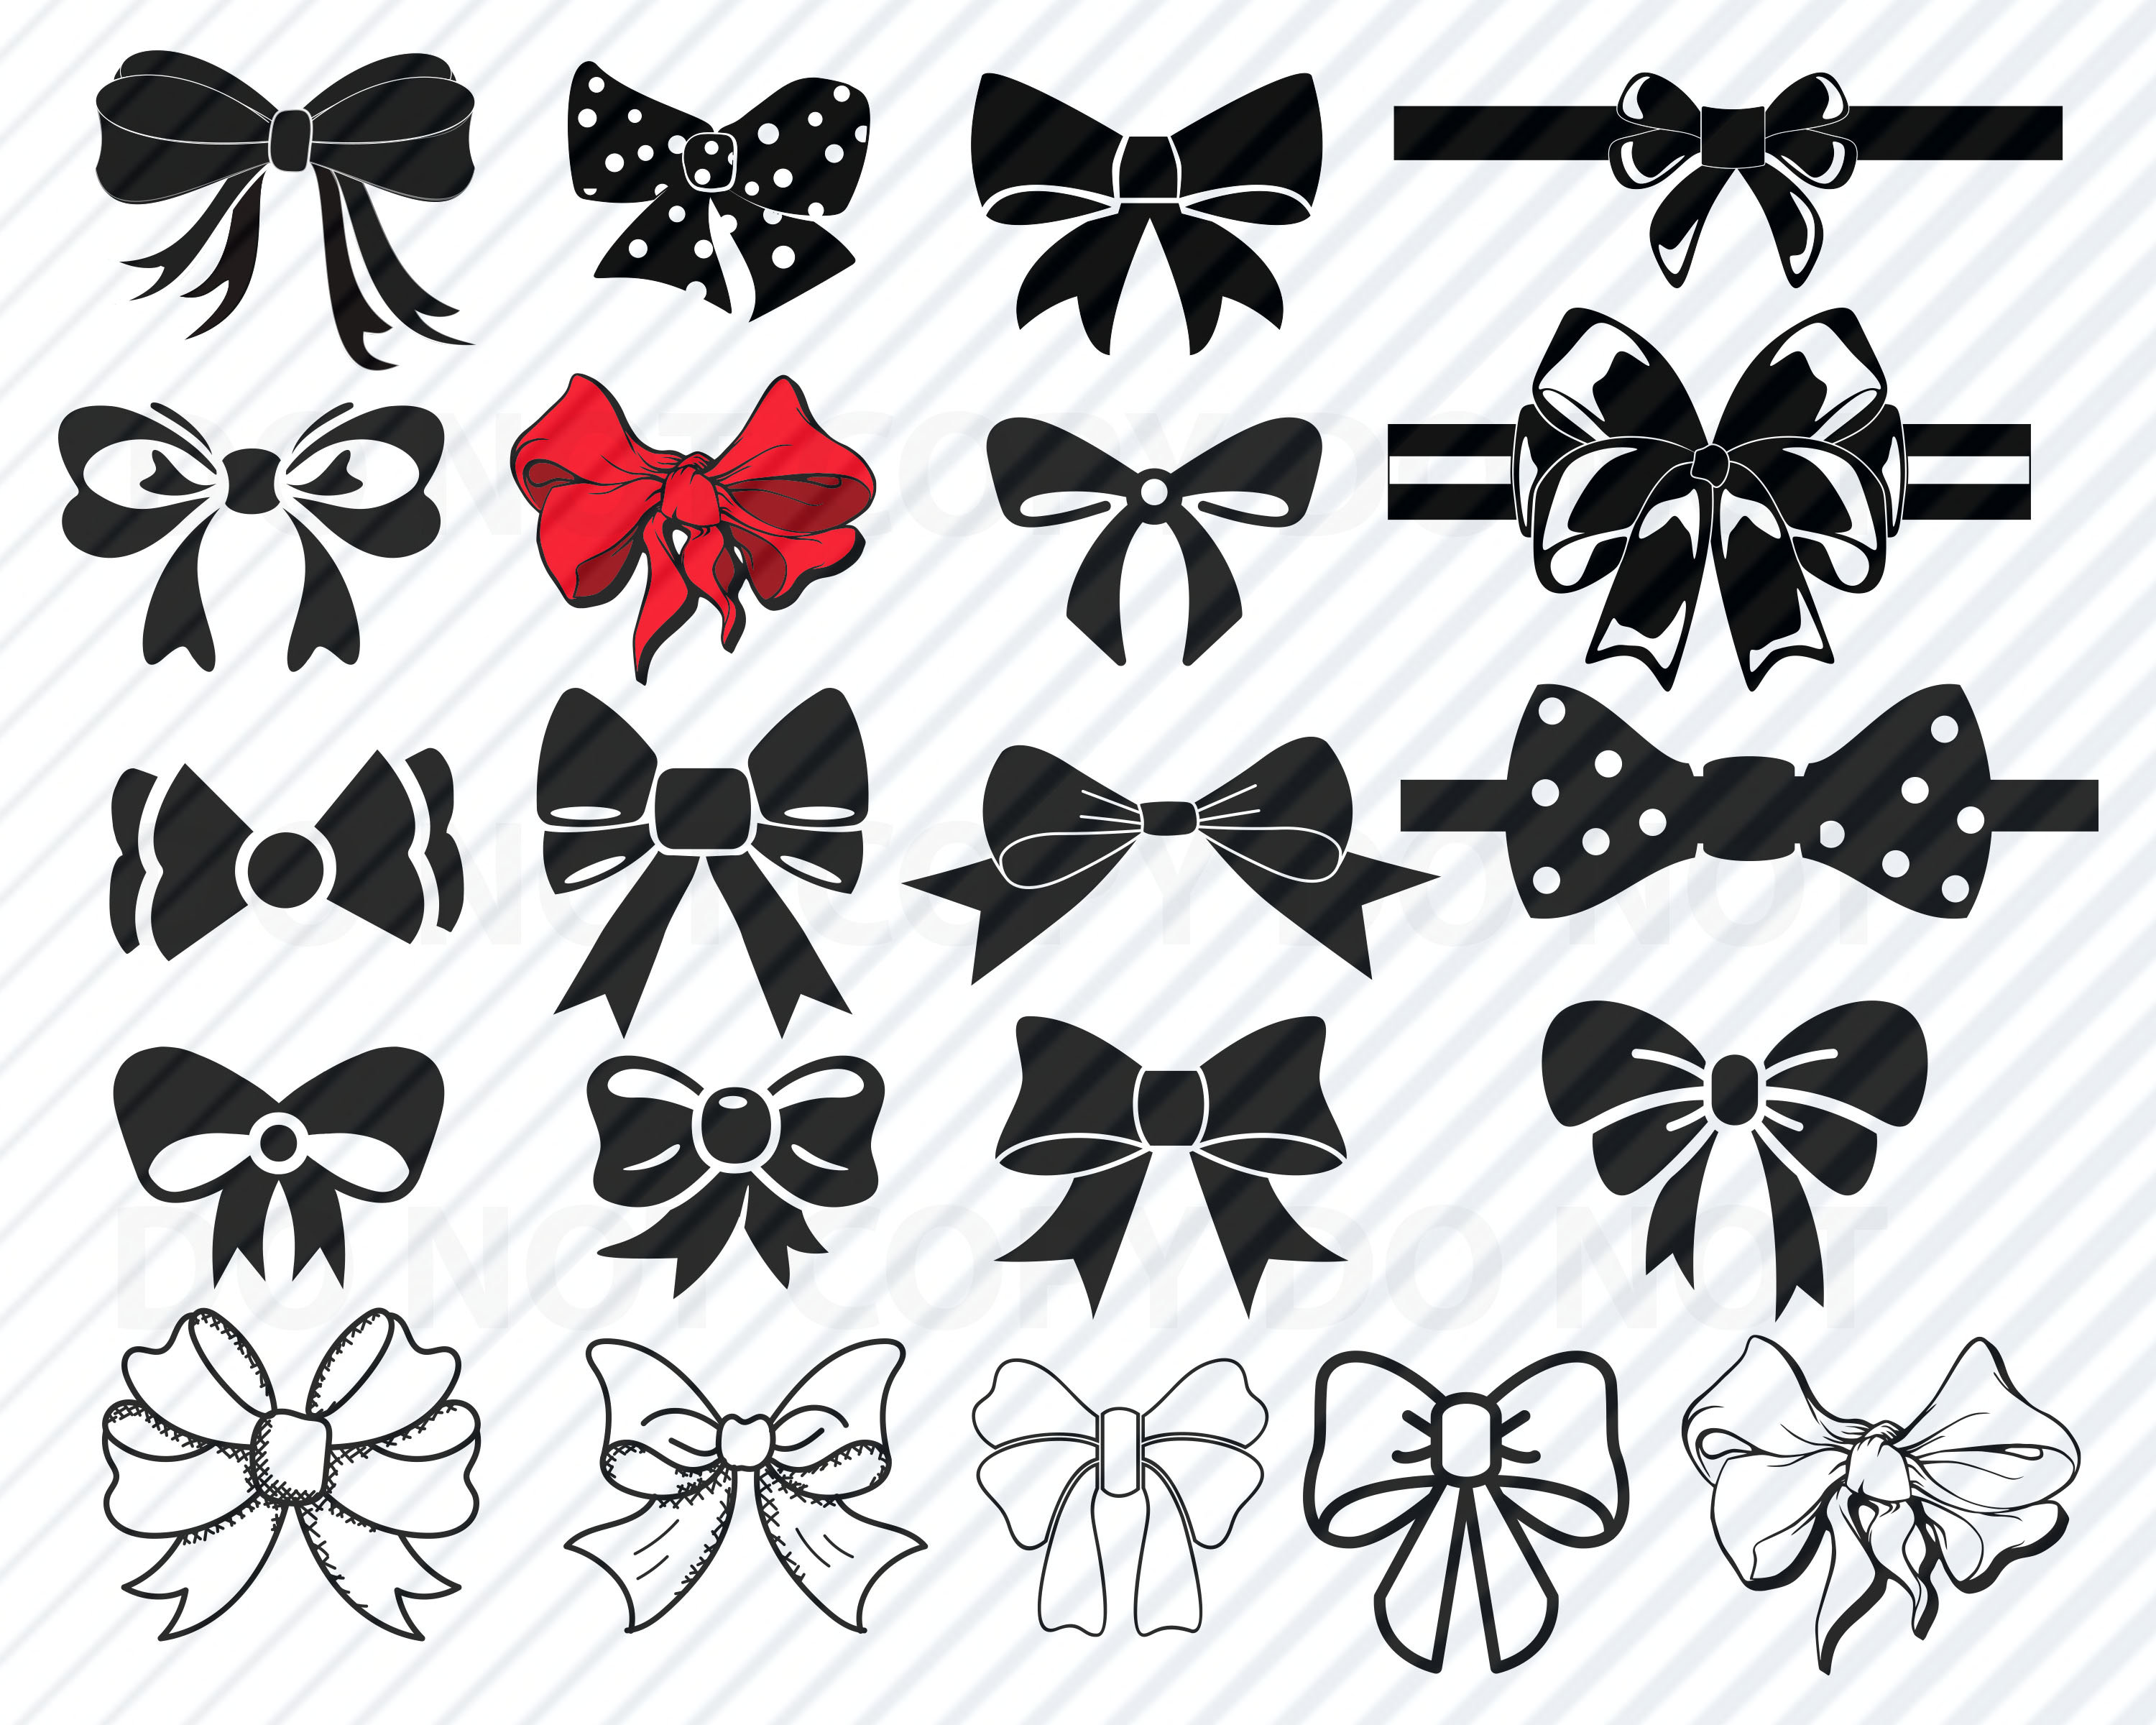 Ribbon Bow Svg, Floral Bow SVG, Bow Tie SVG, Bow Clipart, Bow Ribbon Png,  Cheer Bow Svg -  Canada